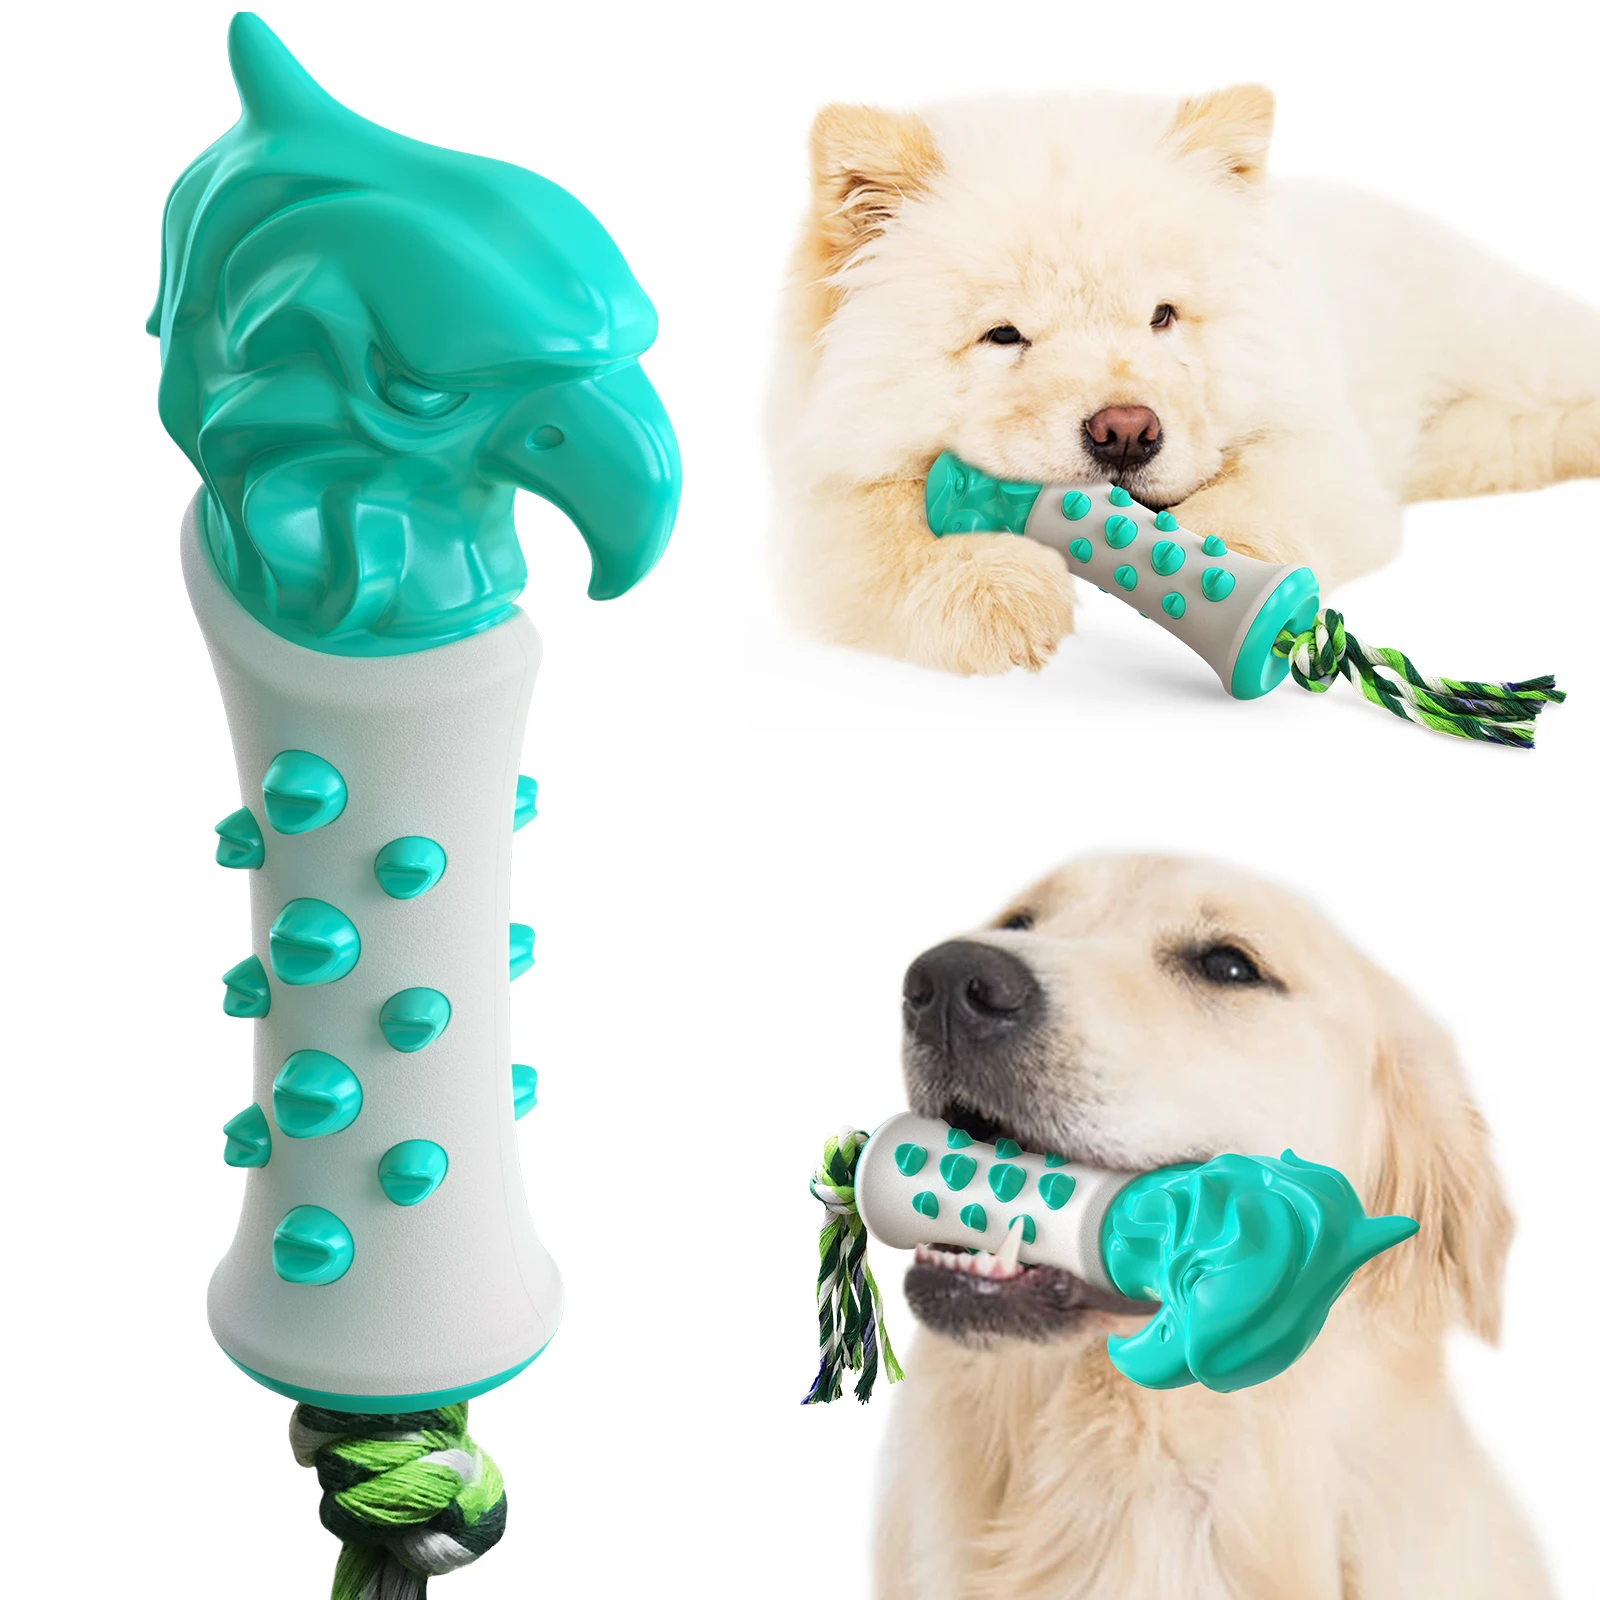 

SJZ Hot Selling New Valentine Vocal Littlest Pet Supplies Shop Training lps Rope Durable Iq Pets Puppy Chew Dog Birthday Toys